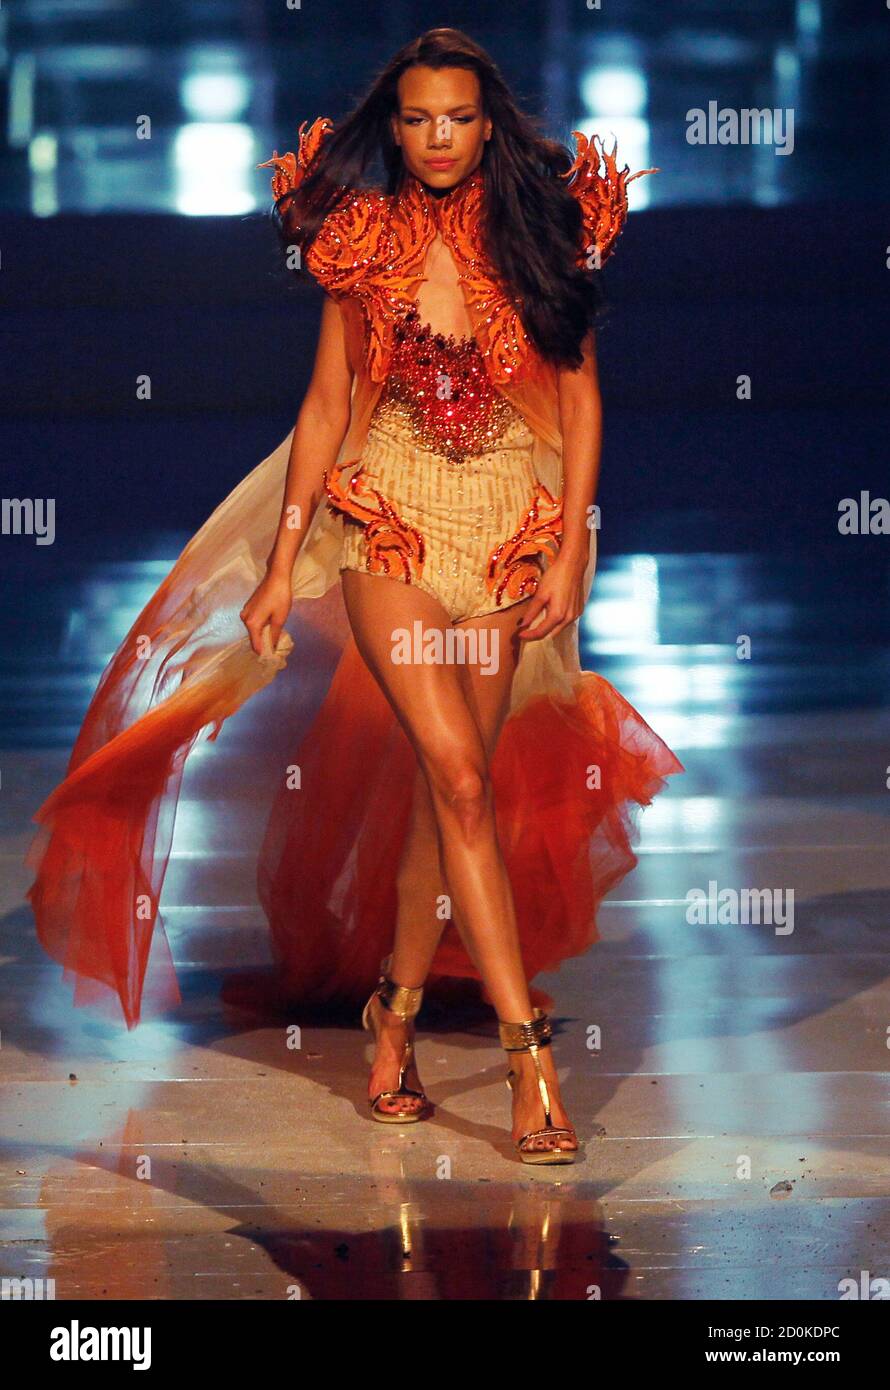 Dominique on the catwalk during the reality TV show "Germany's Next Top Model by Heidi Klum" in Cologne June 7, 2012. REUTERS/Wolfgang Rattay (GERMANY - Tags: ENTERTAINMENT FASHION Stock Photo - Alamy